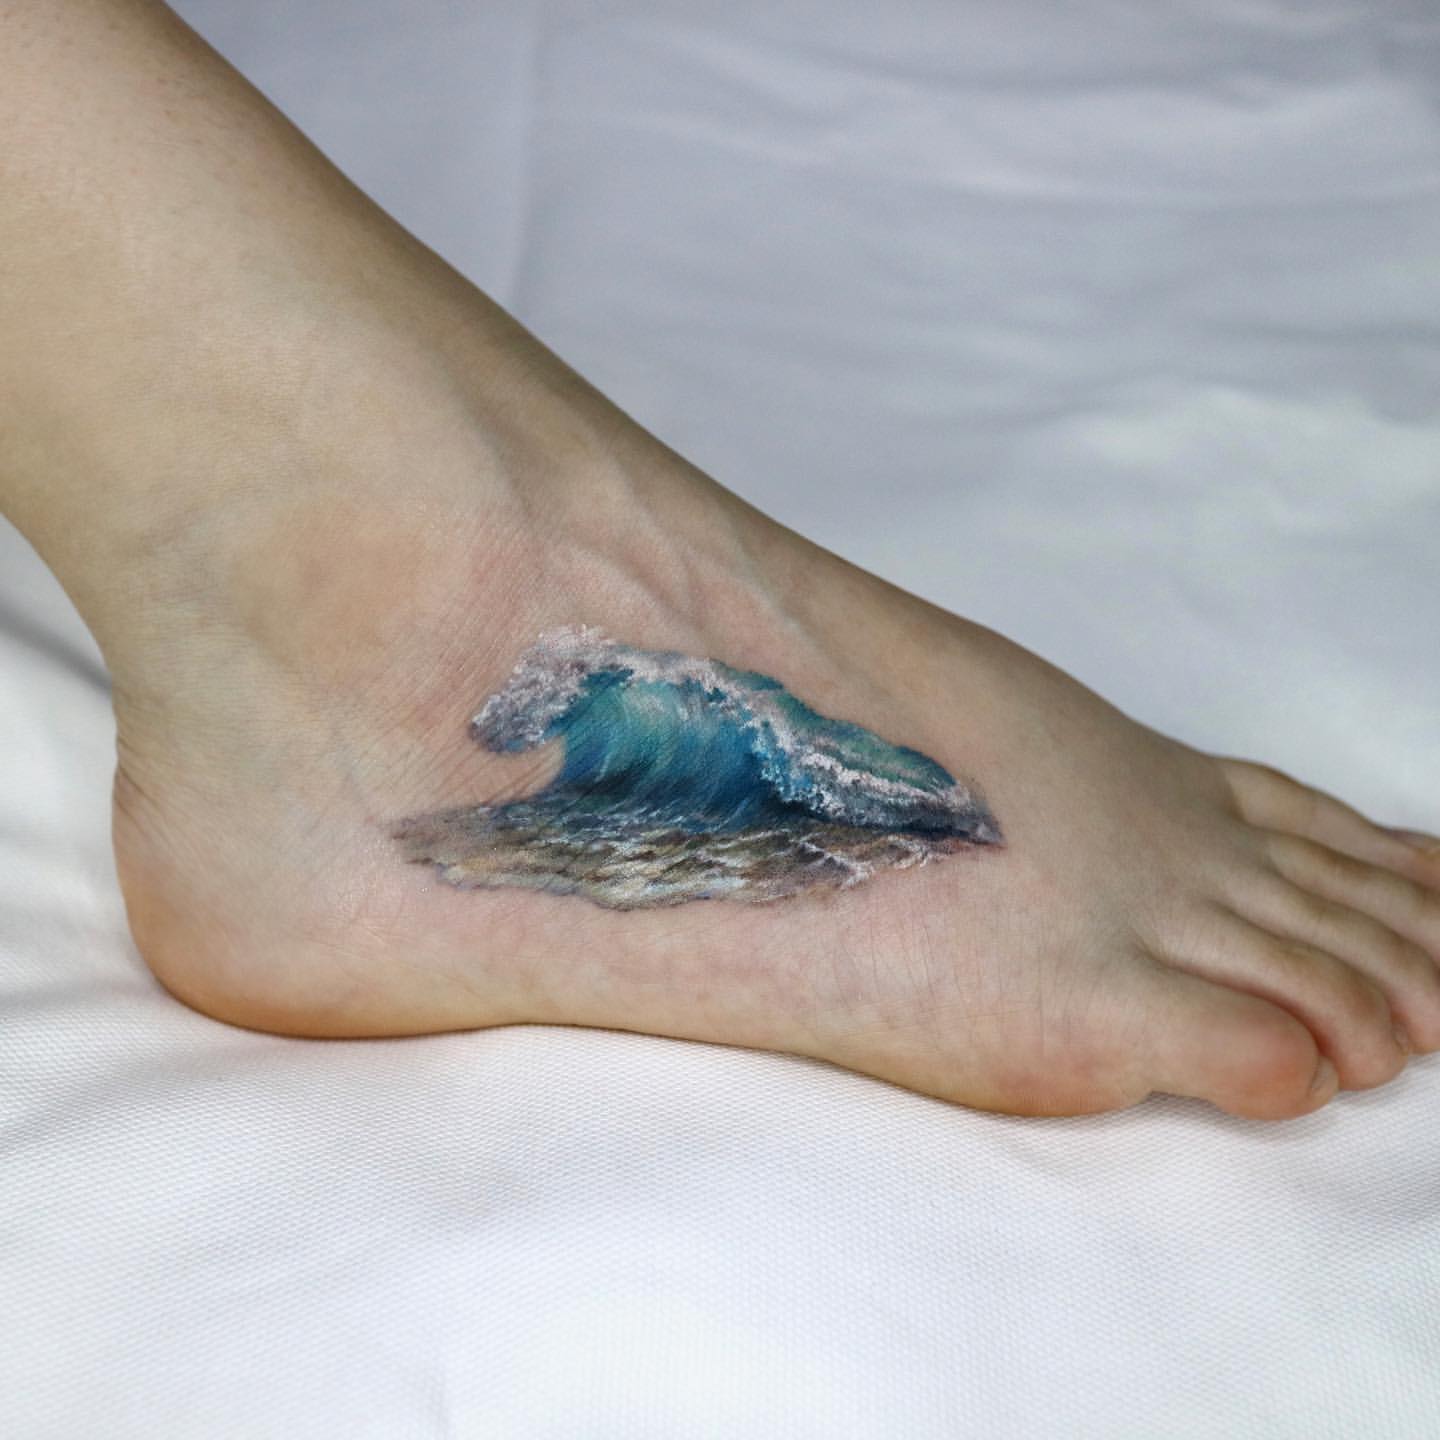 Foot Tattoos for Women 2